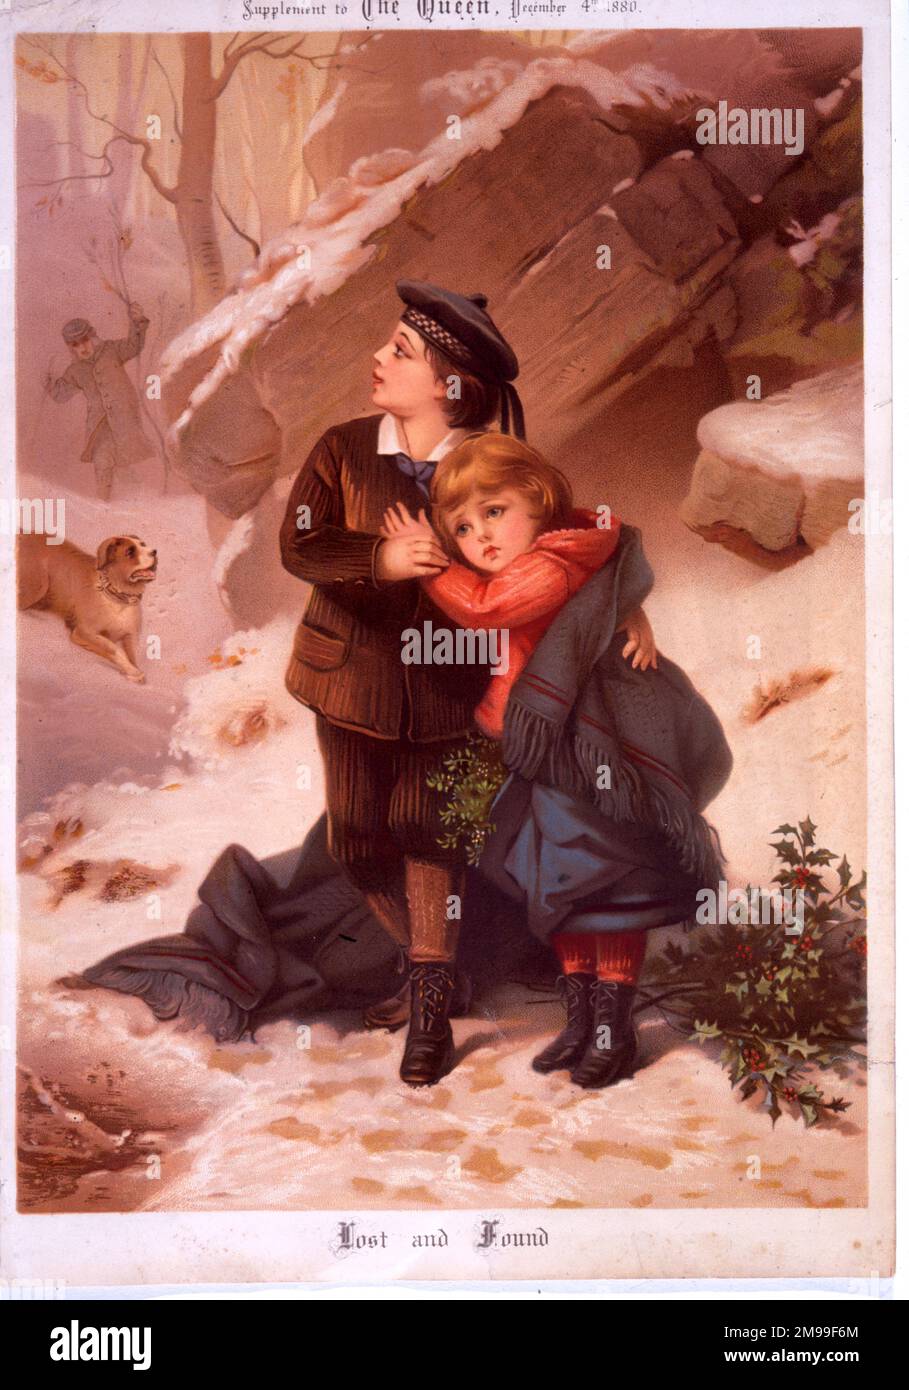 Lost and Found - Christmas 1880. Stock Photo